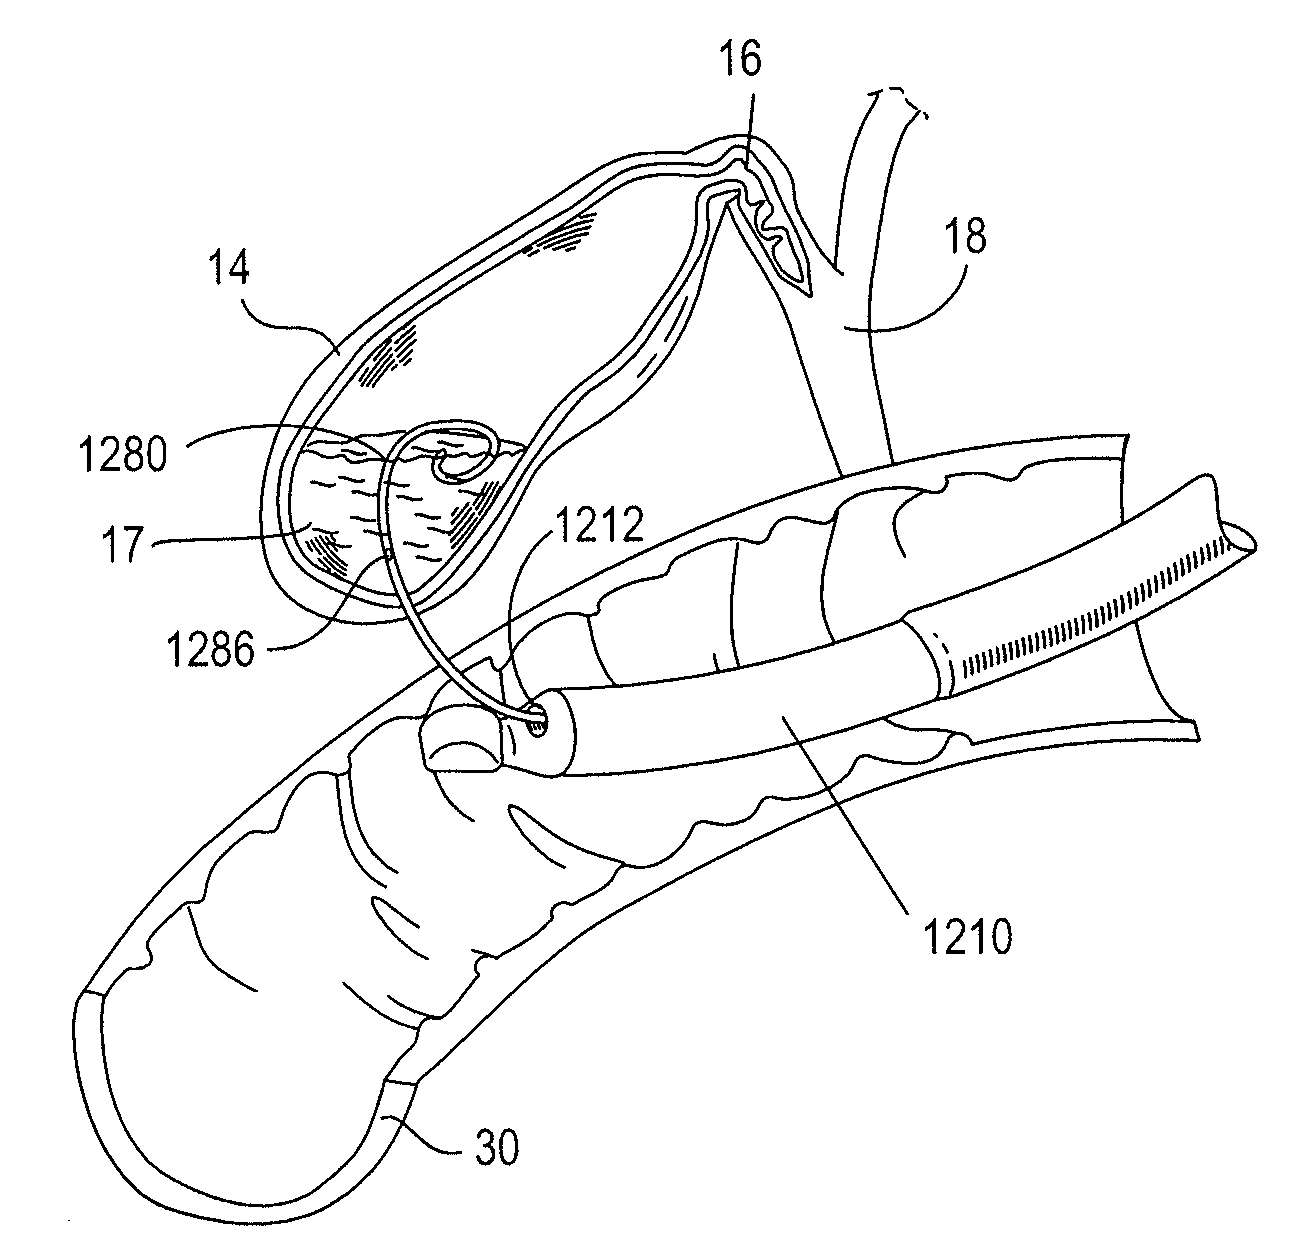 Biliary shunts, delivery systems, and methods of using the same